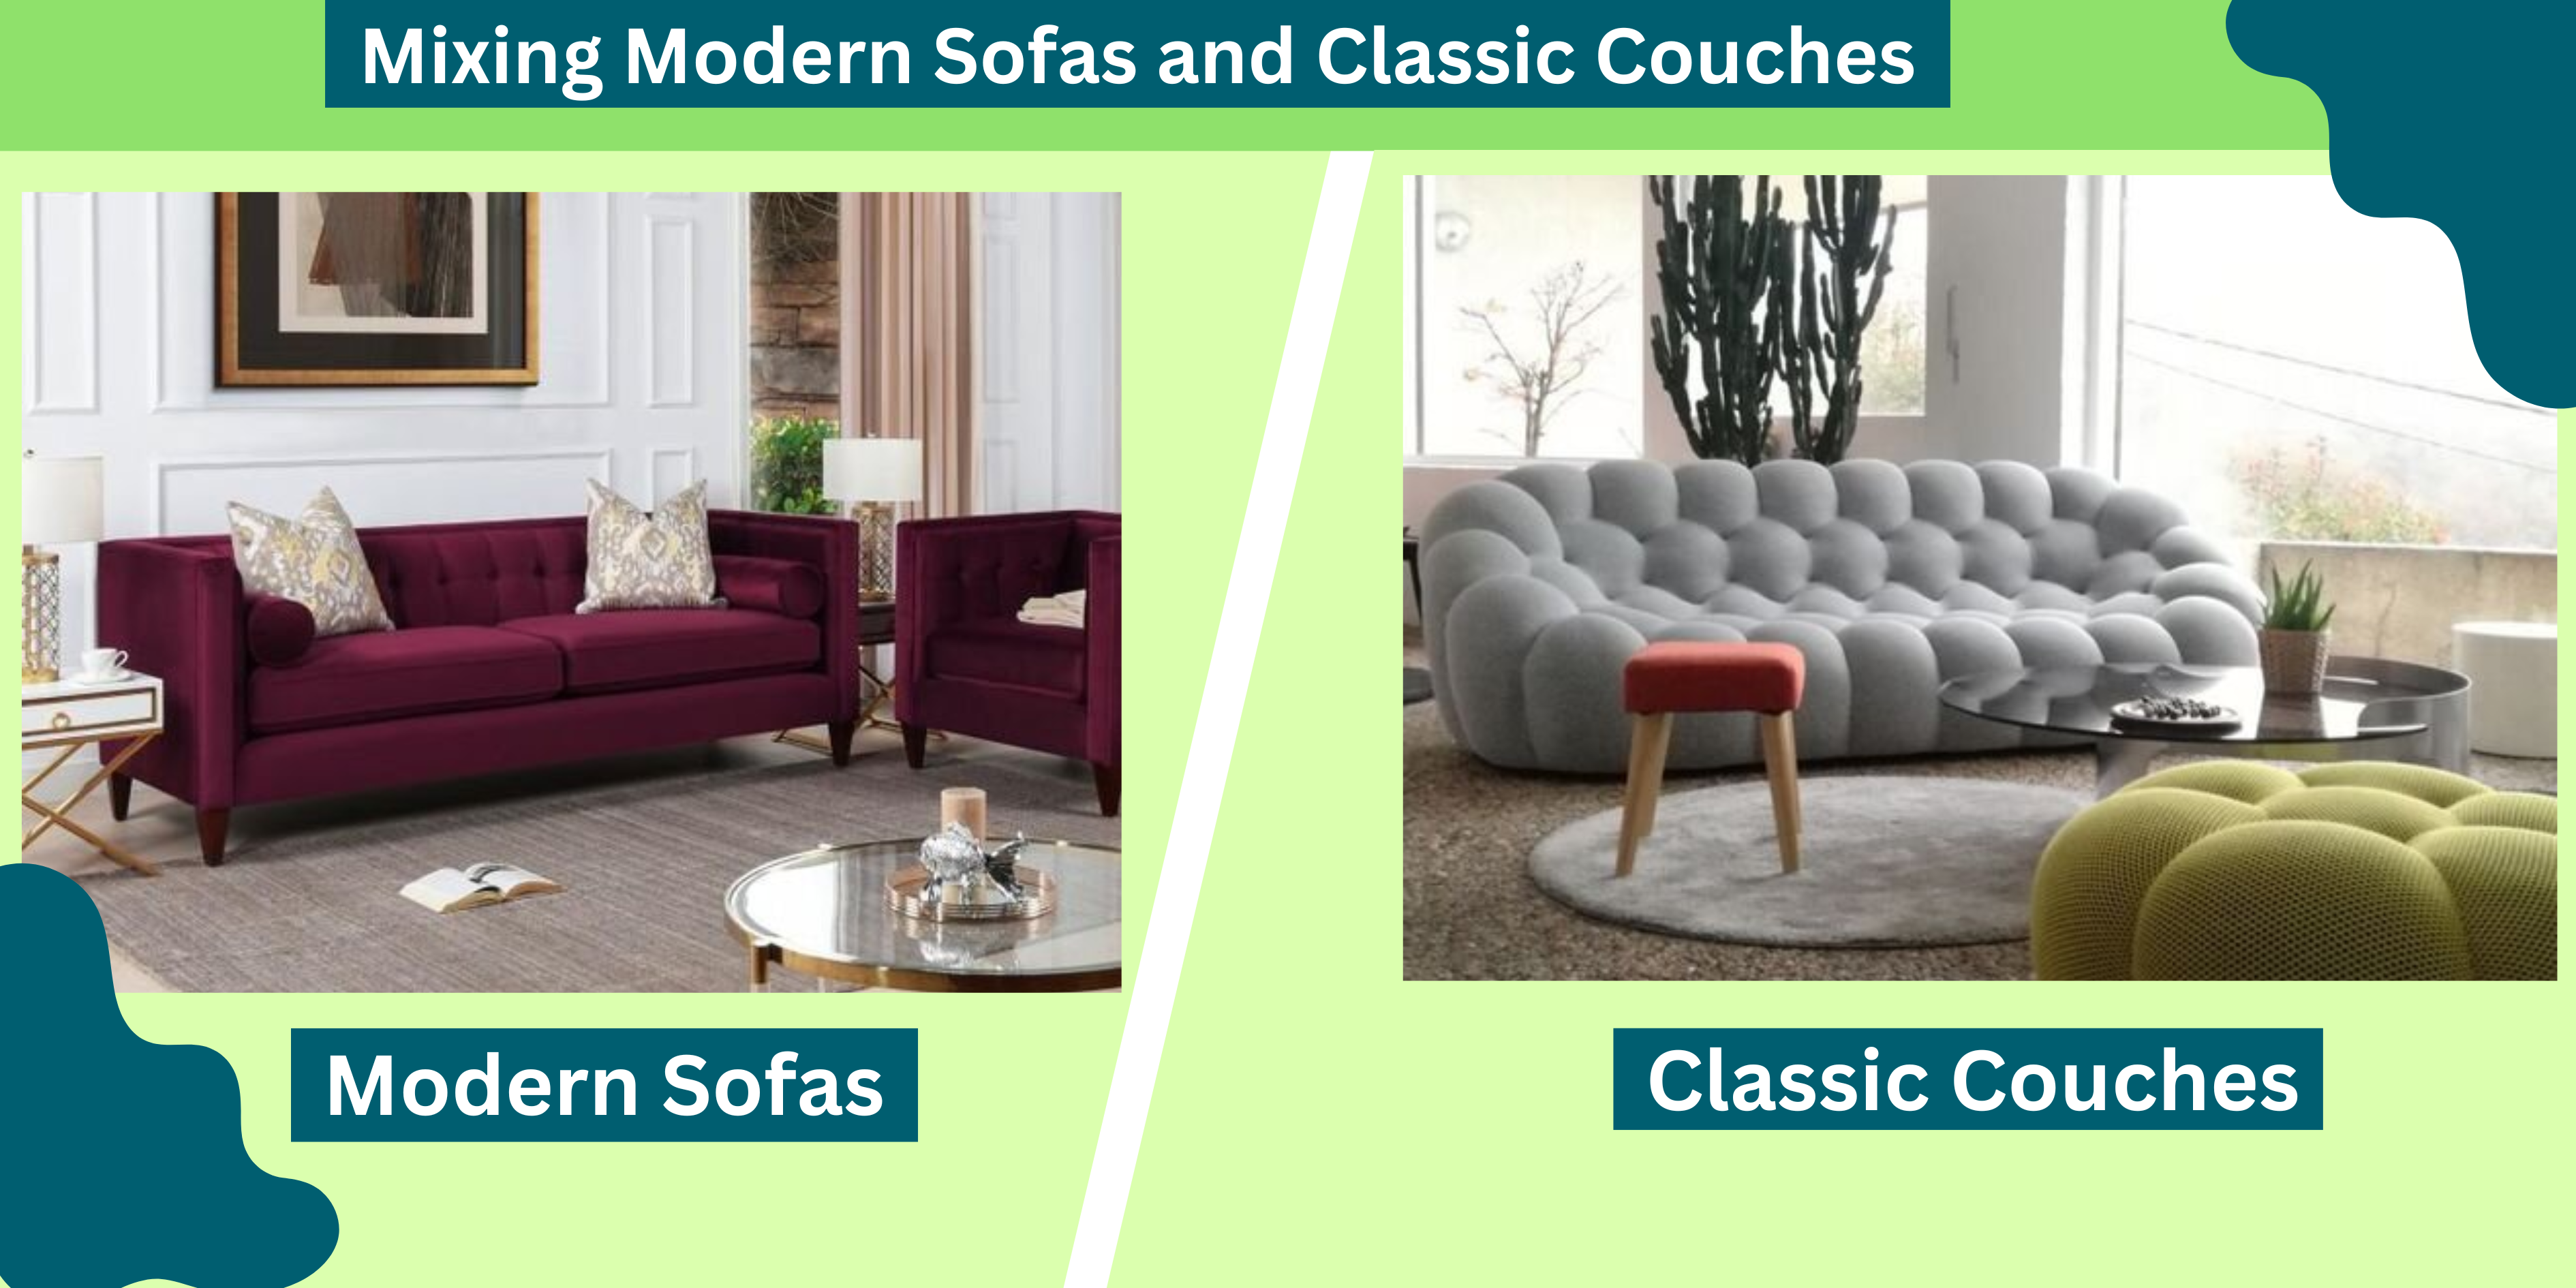 Mixing Modern Sofas and Classic Couches